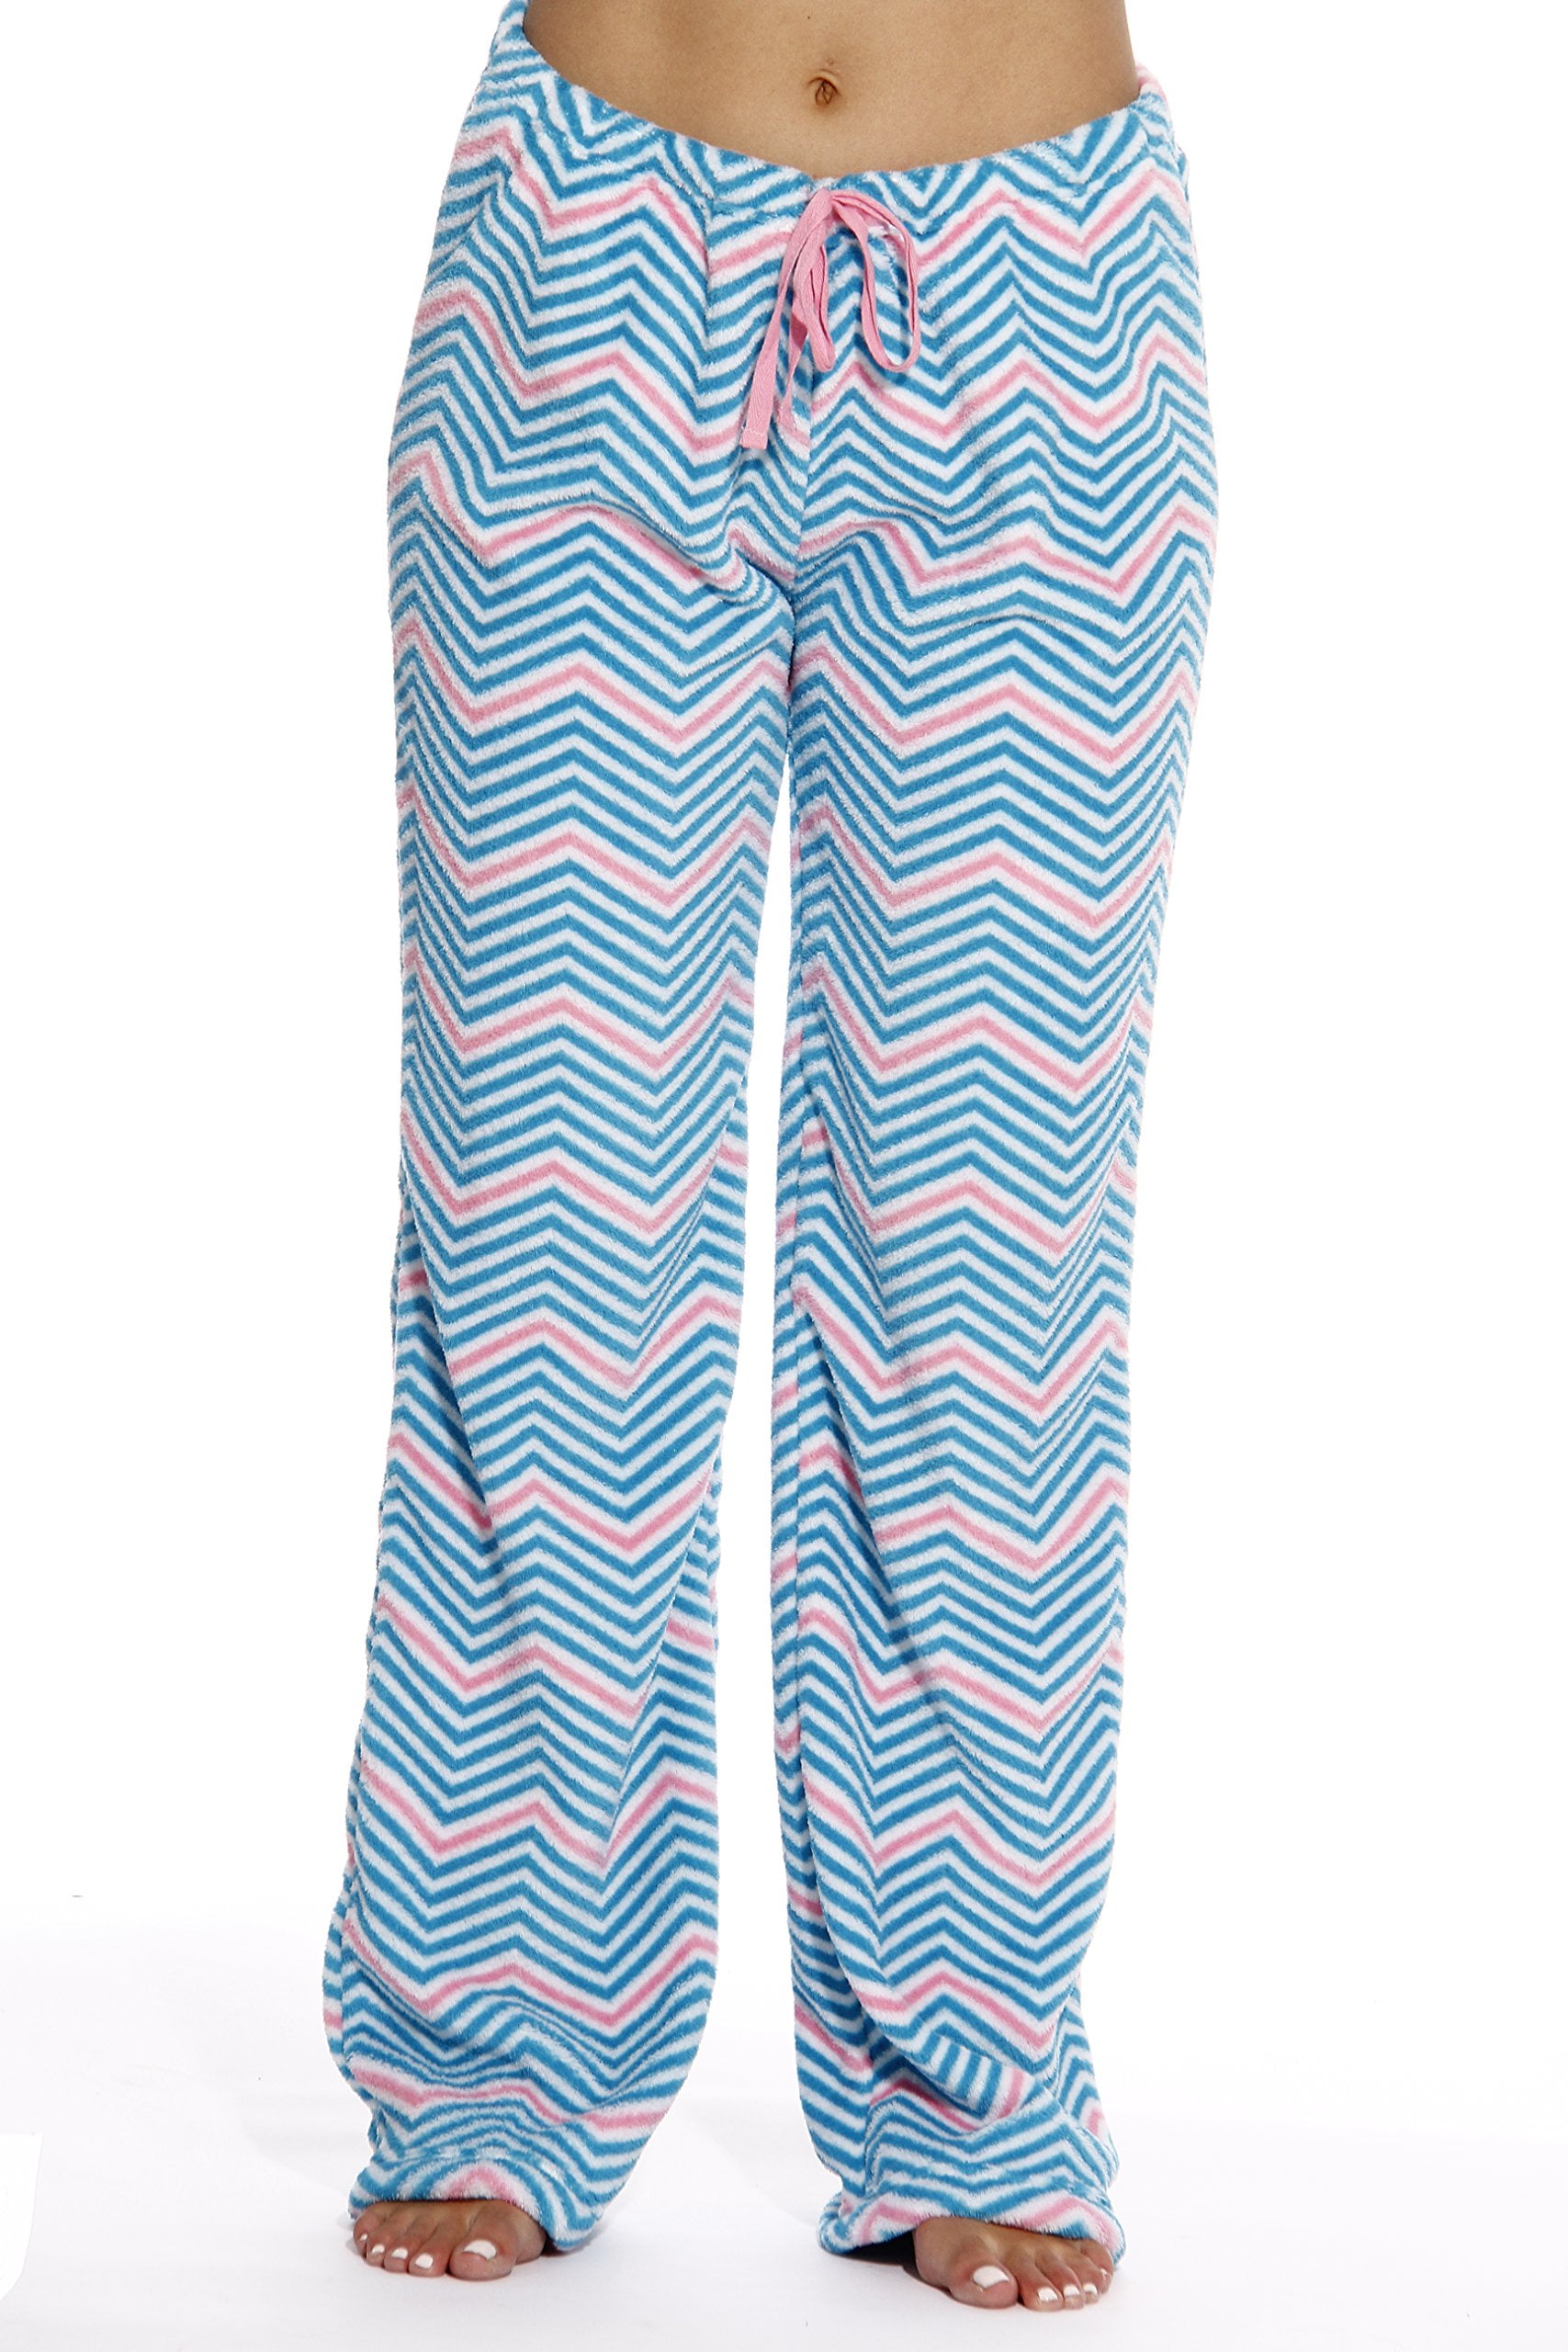 Just Love Women's Plush Pajama Pants - Soft and Cozy Lounge Pants in Petite  to Plus Sizes (Chevron - Turquoise / Pink, Small) 